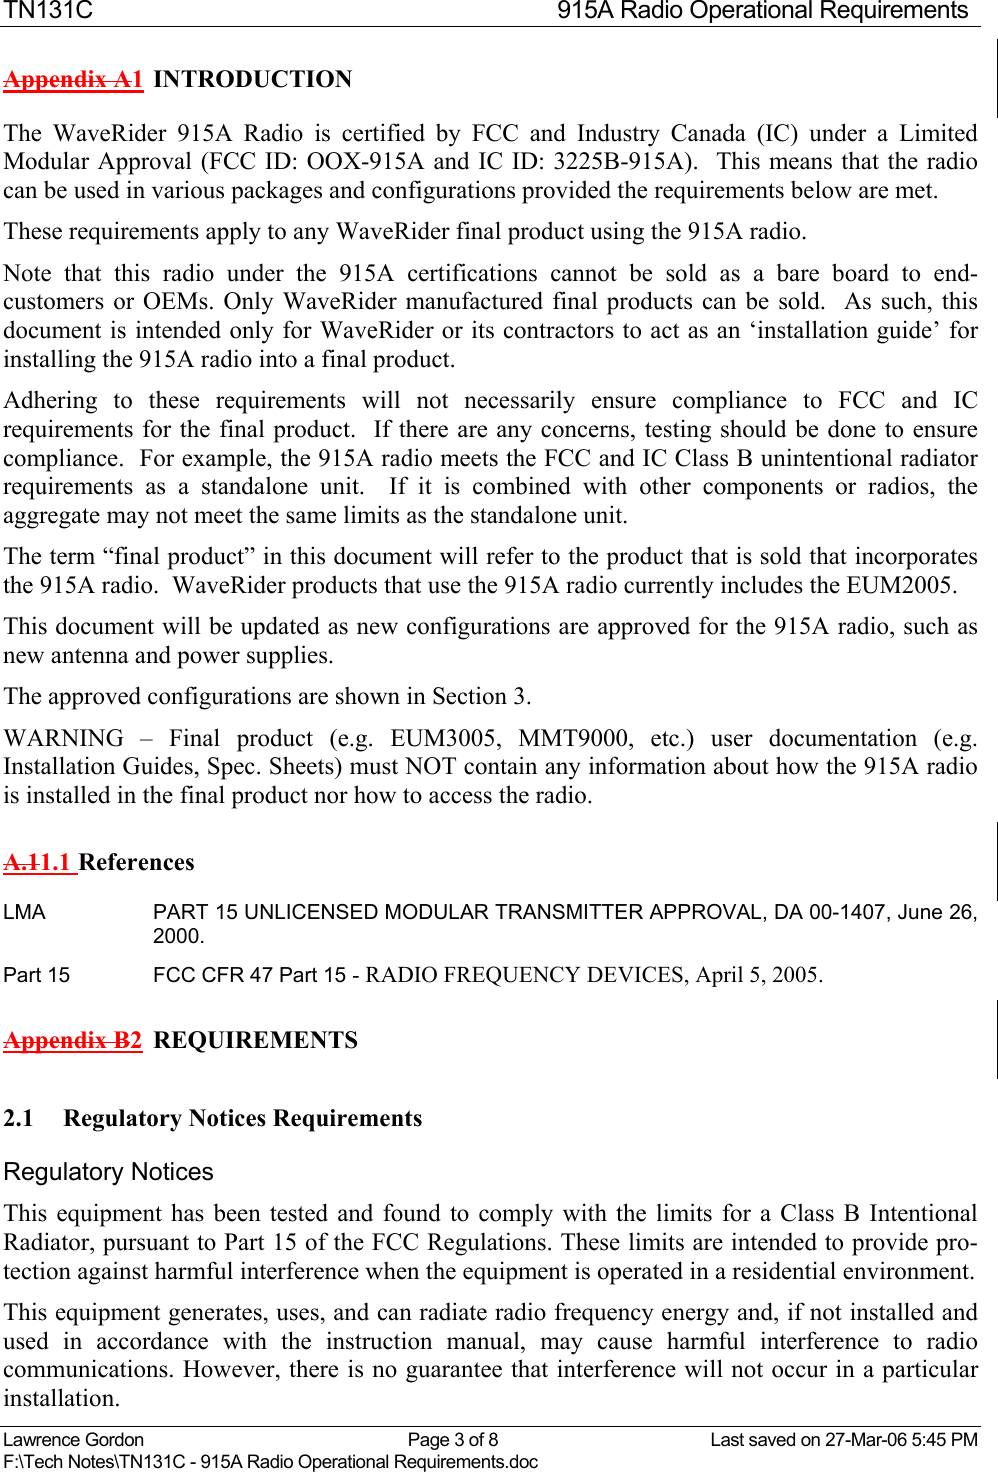 TN131C  915A Radio Operational Requirements Lawrence Gordon  Page 3 of 8  Last saved on 27-Mar-06 5:45 PM F:\Tech Notes\TN131C - 915A Radio Operational Requirements.doc   Appendix A1 INTRODUCTION  The WaveRider 915A Radio is certified by FCC and Industry Canada (IC) under a Limited Modular Approval (FCC ID: OOX-915A and IC ID: 3225B-915A).  This means that the radio can be used in various packages and configurations provided the requirements below are met.   These requirements apply to any WaveRider final product using the 915A radio.   Note that this radio under the 915A certifications cannot be sold as a bare board to end-customers or OEMs. Only WaveRider manufactured final products can be sold.  As such, this document is intended only for WaveRider or its contractors to act as an ‘installation guide’ for installing the 915A radio into a final product. Adhering to these requirements will not necessarily ensure compliance to FCC and IC requirements for the final product.  If there are any concerns, testing should be done to ensure compliance.  For example, the 915A radio meets the FCC and IC Class B unintentional radiator requirements as a standalone unit.  If it is combined with other components or radios, the aggregate may not meet the same limits as the standalone unit. The term “final product” in this document will refer to the product that is sold that incorporates the 915A radio.  WaveRider products that use the 915A radio currently includes the EUM2005.   This document will be updated as new configurations are approved for the 915A radio, such as new antenna and power supplies.  The approved configurations are shown in Section 3. WARNING – Final product (e.g. EUM3005, MMT9000, etc.) user documentation (e.g. Installation Guides, Spec. Sheets) must NOT contain any information about how the 915A radio is installed in the final product nor how to access the radio. A.11.1 References LMA  PART 15 UNLICENSED MODULAR TRANSMITTER APPROVAL, DA 00-1407, June 26, 2000. Part 15  FCC CFR 47 Part 15 - RADIO FREQUENCY DEVICES, April 5, 2005. Appendix B2  REQUIREMENTS 2.1 Regulatory Notices Requirements Regulatory Notices This equipment has been tested and found to comply with the limits for a Class B Intentional Radiator, pursuant to Part 15 of the FCC Regulations. These limits are intended to provide pro-tection against harmful interference when the equipment is operated in a residential environment. This equipment generates, uses, and can radiate radio frequency energy and, if not installed and used in accordance with the instruction manual, may cause harmful interference to radio communications. However, there is no guarantee that interference will not occur in a particular installation. 